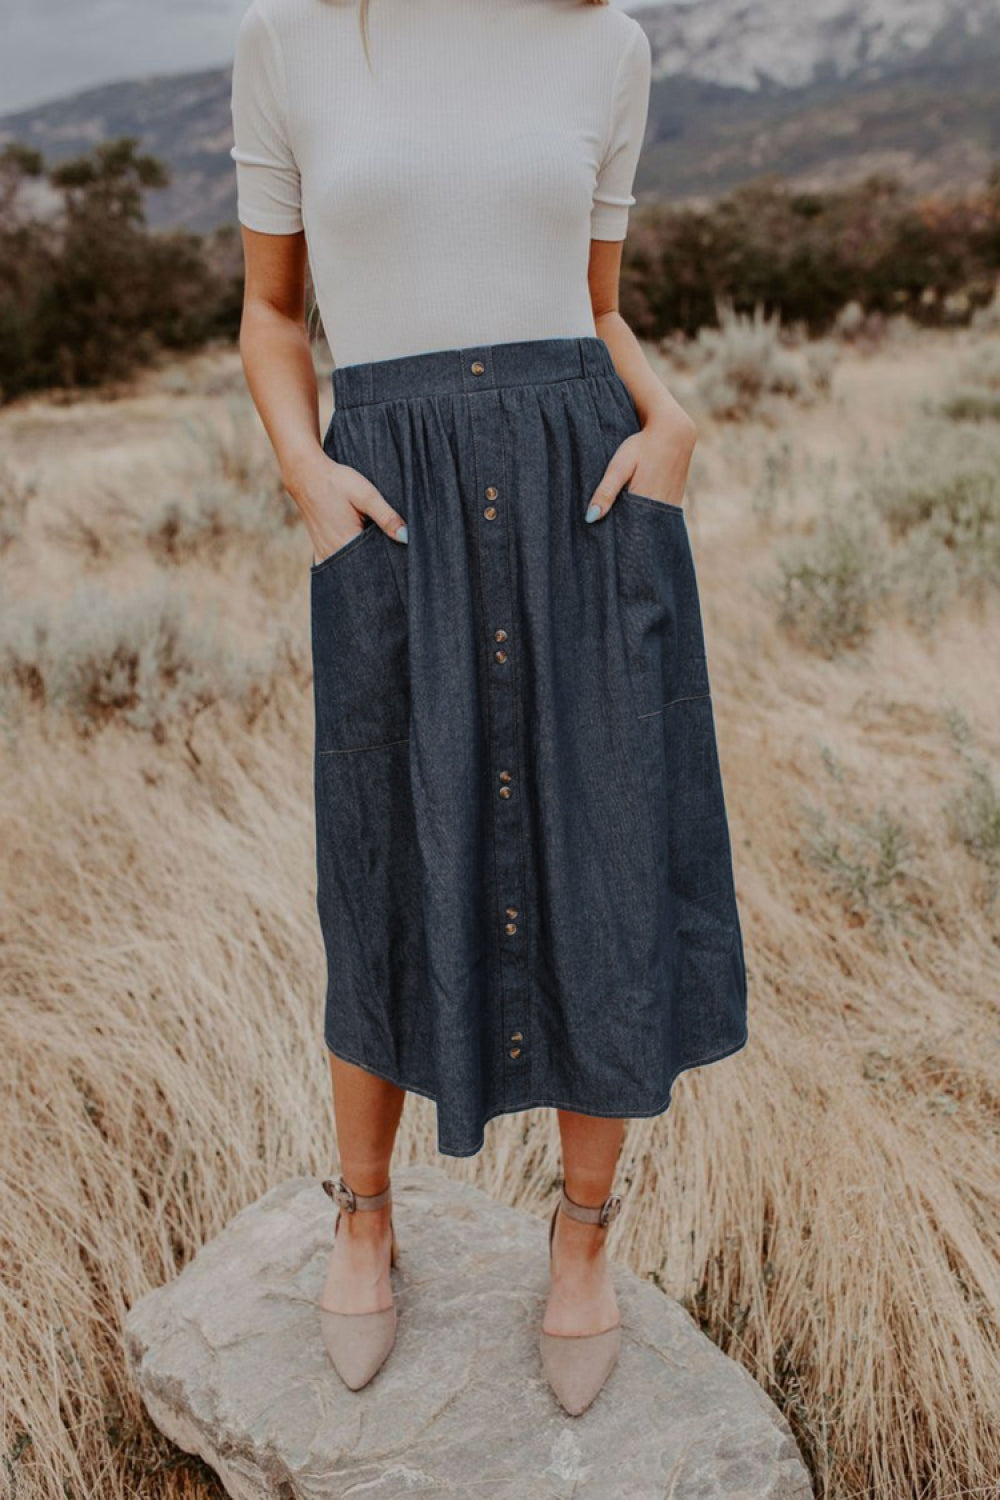 Experience the Nature Pocket Skirt